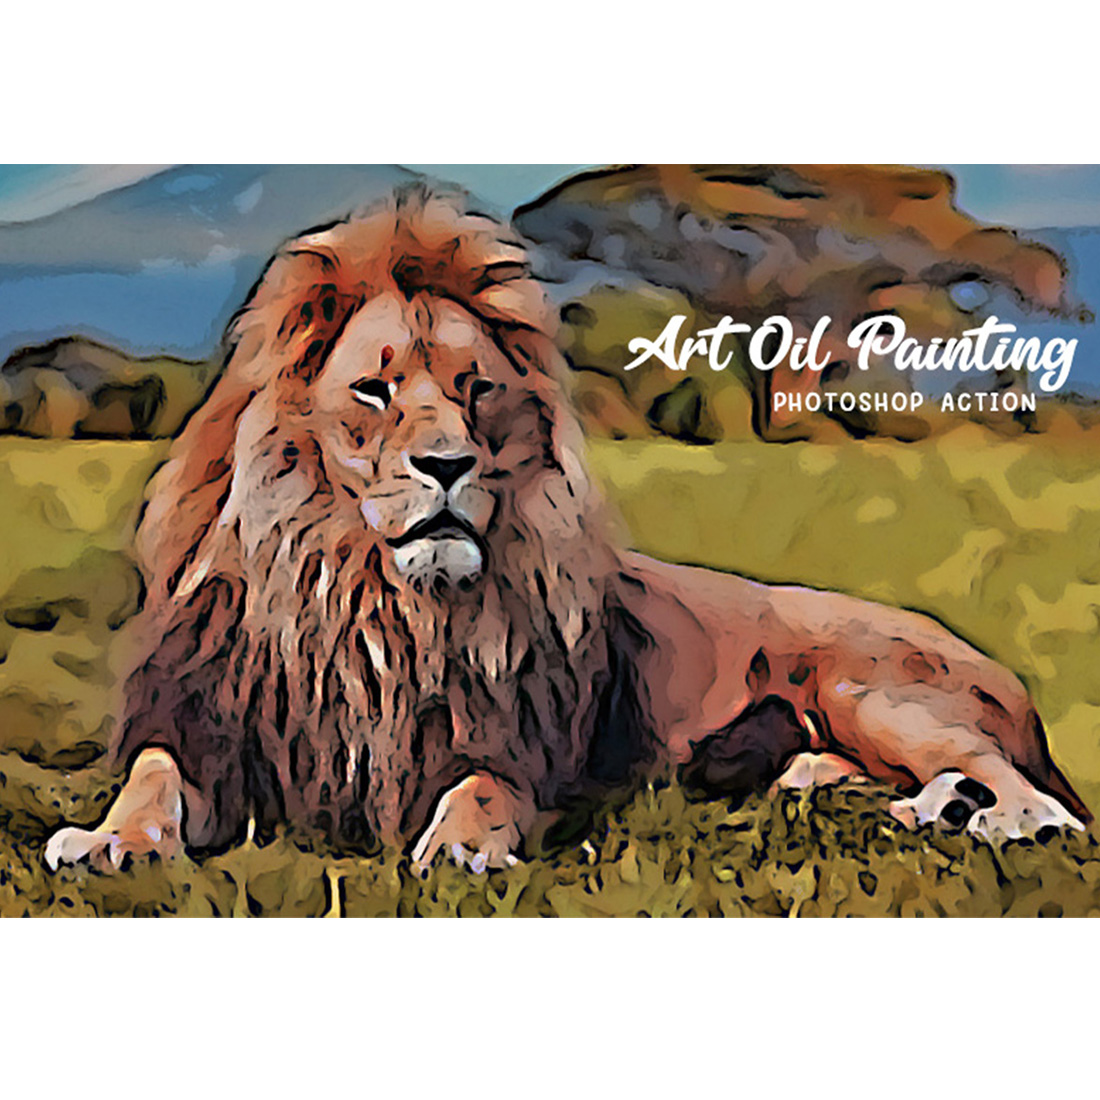 Art Oil Painting Photoshop Action cover image.